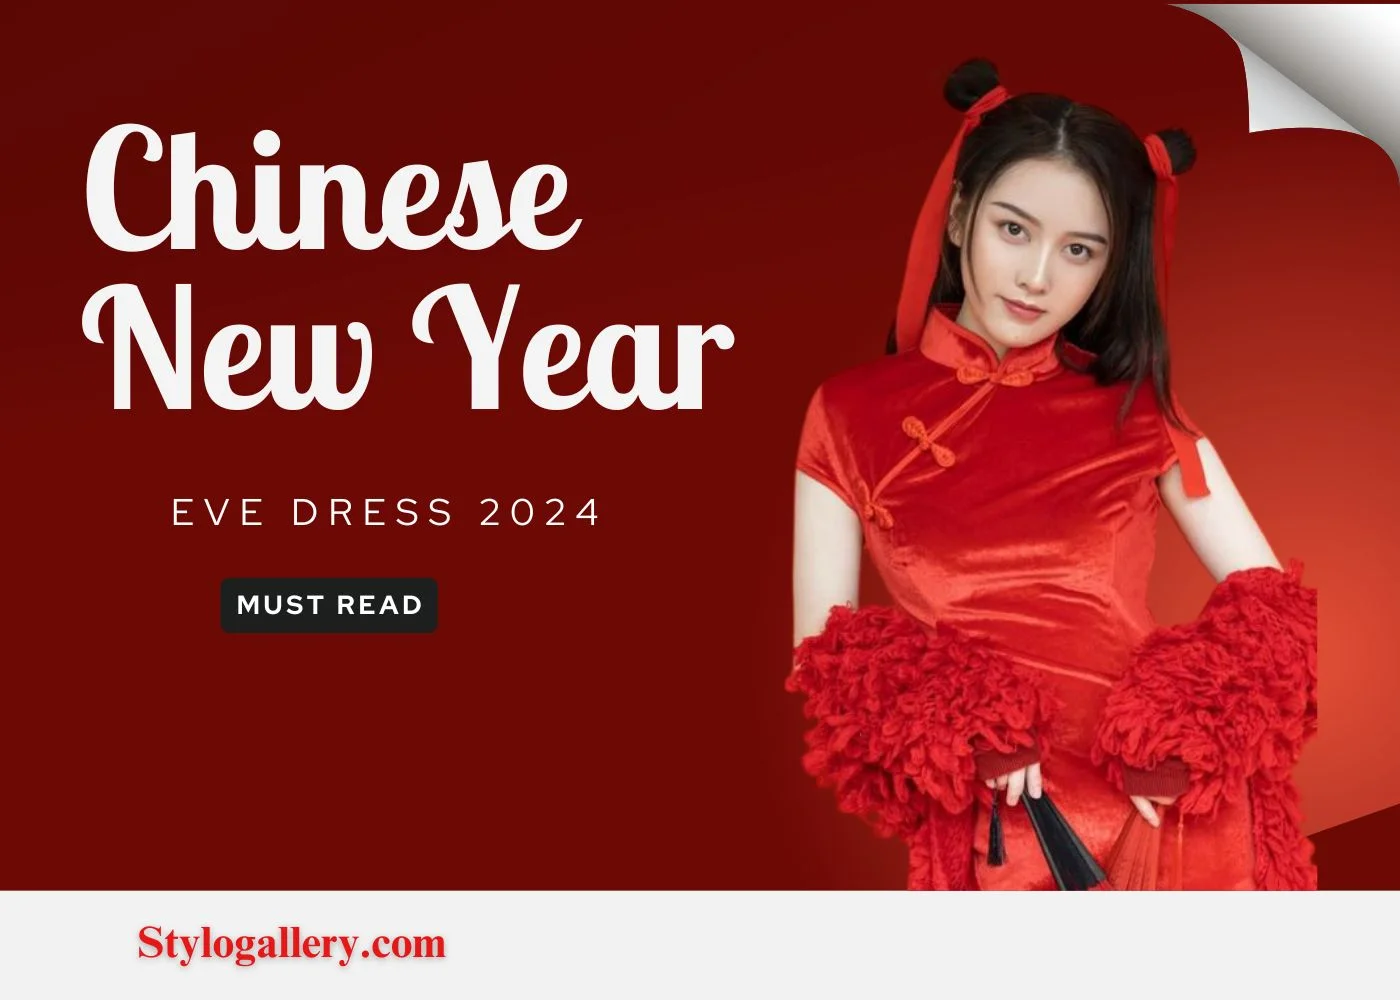 What do you wear on Chinese New Year’s Eve